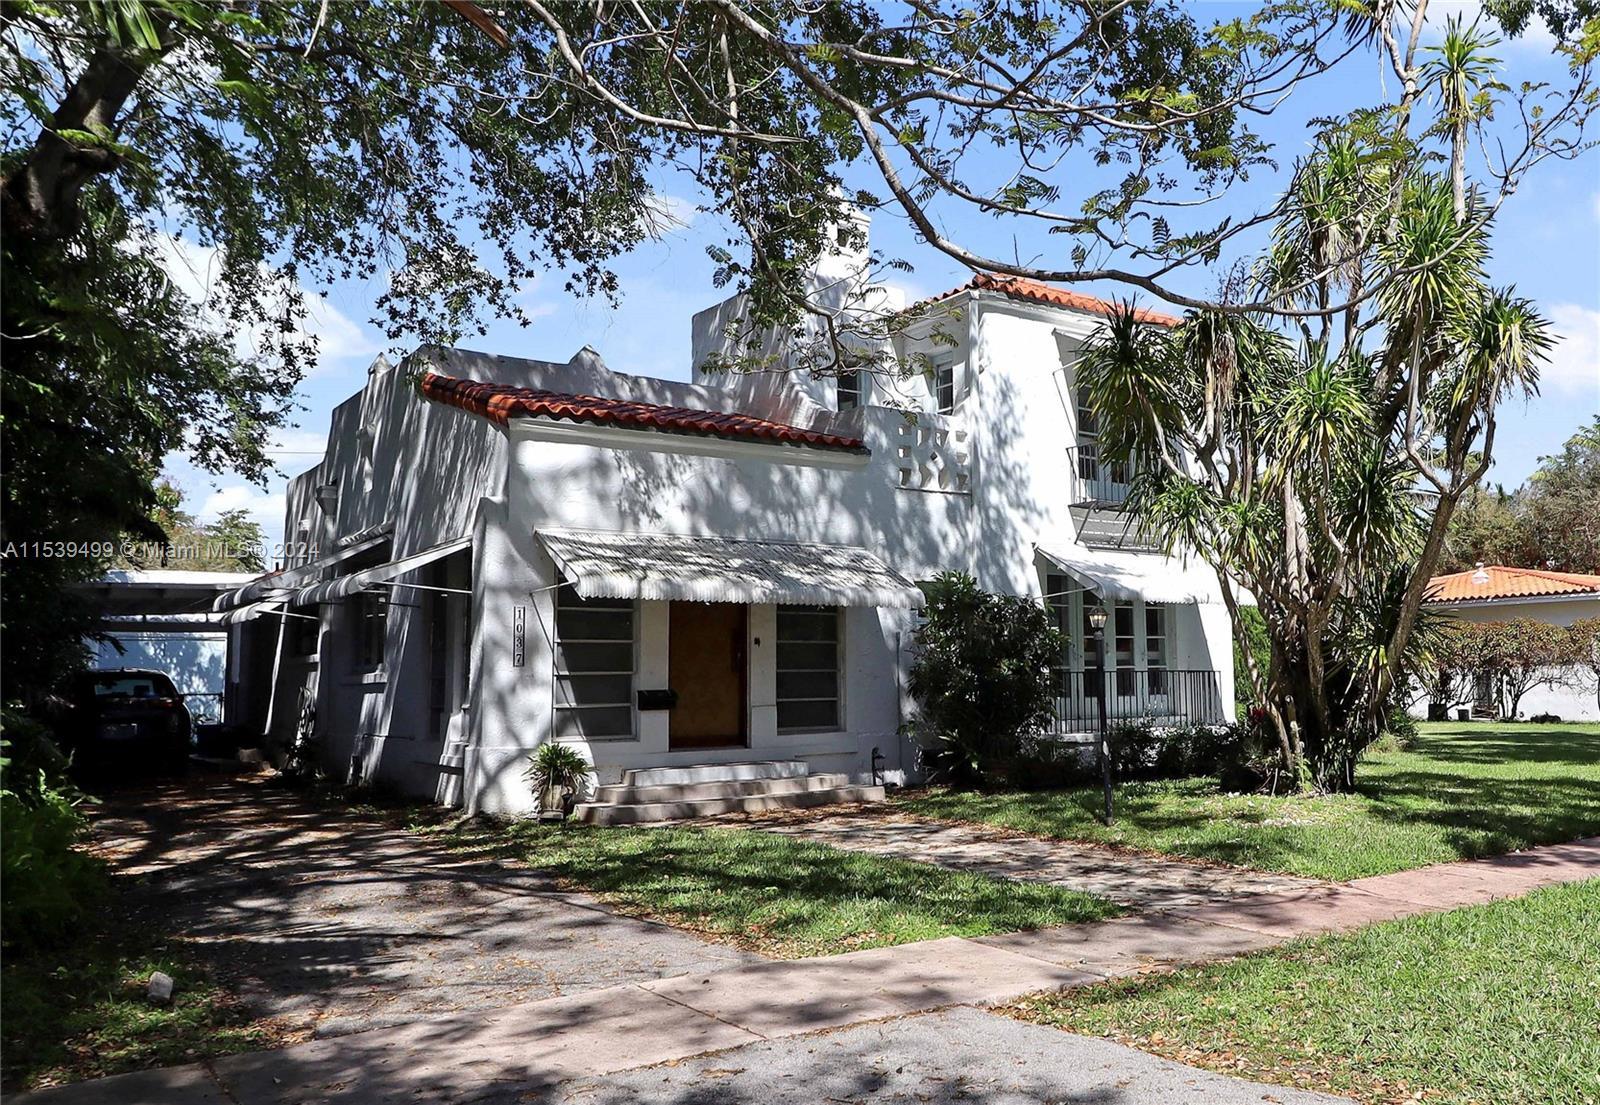 Photo of 1037 Castile Ave in Coral Gables, FL